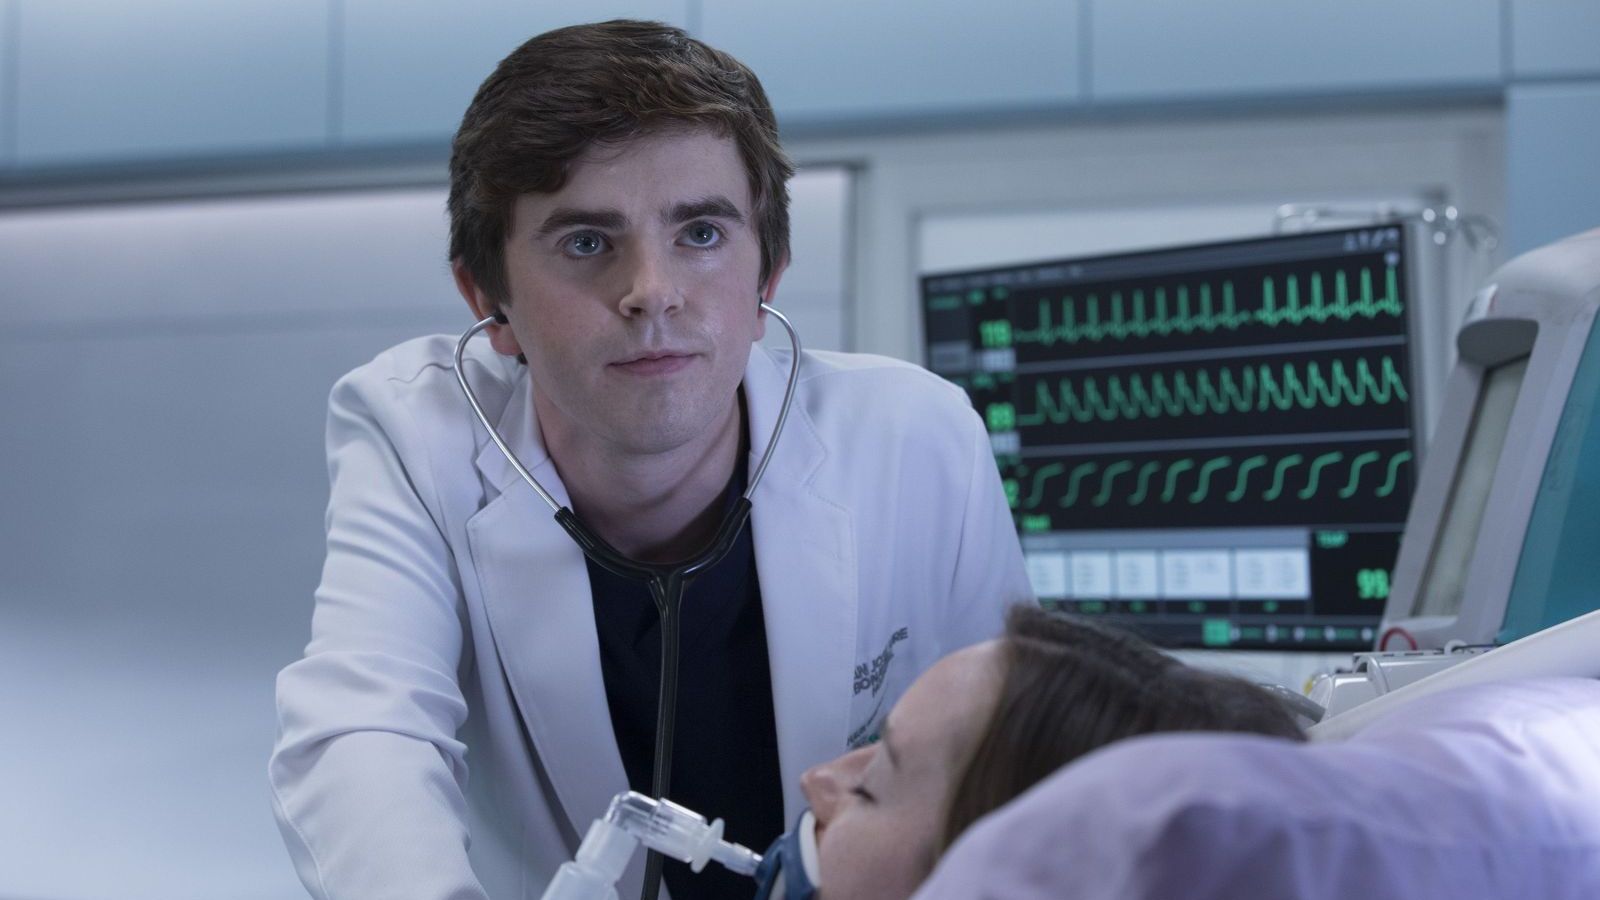 The Good Doctor Online S01e02 How to Watch 'The Good Doctor' Online - Live Stream Season 3 Episodes